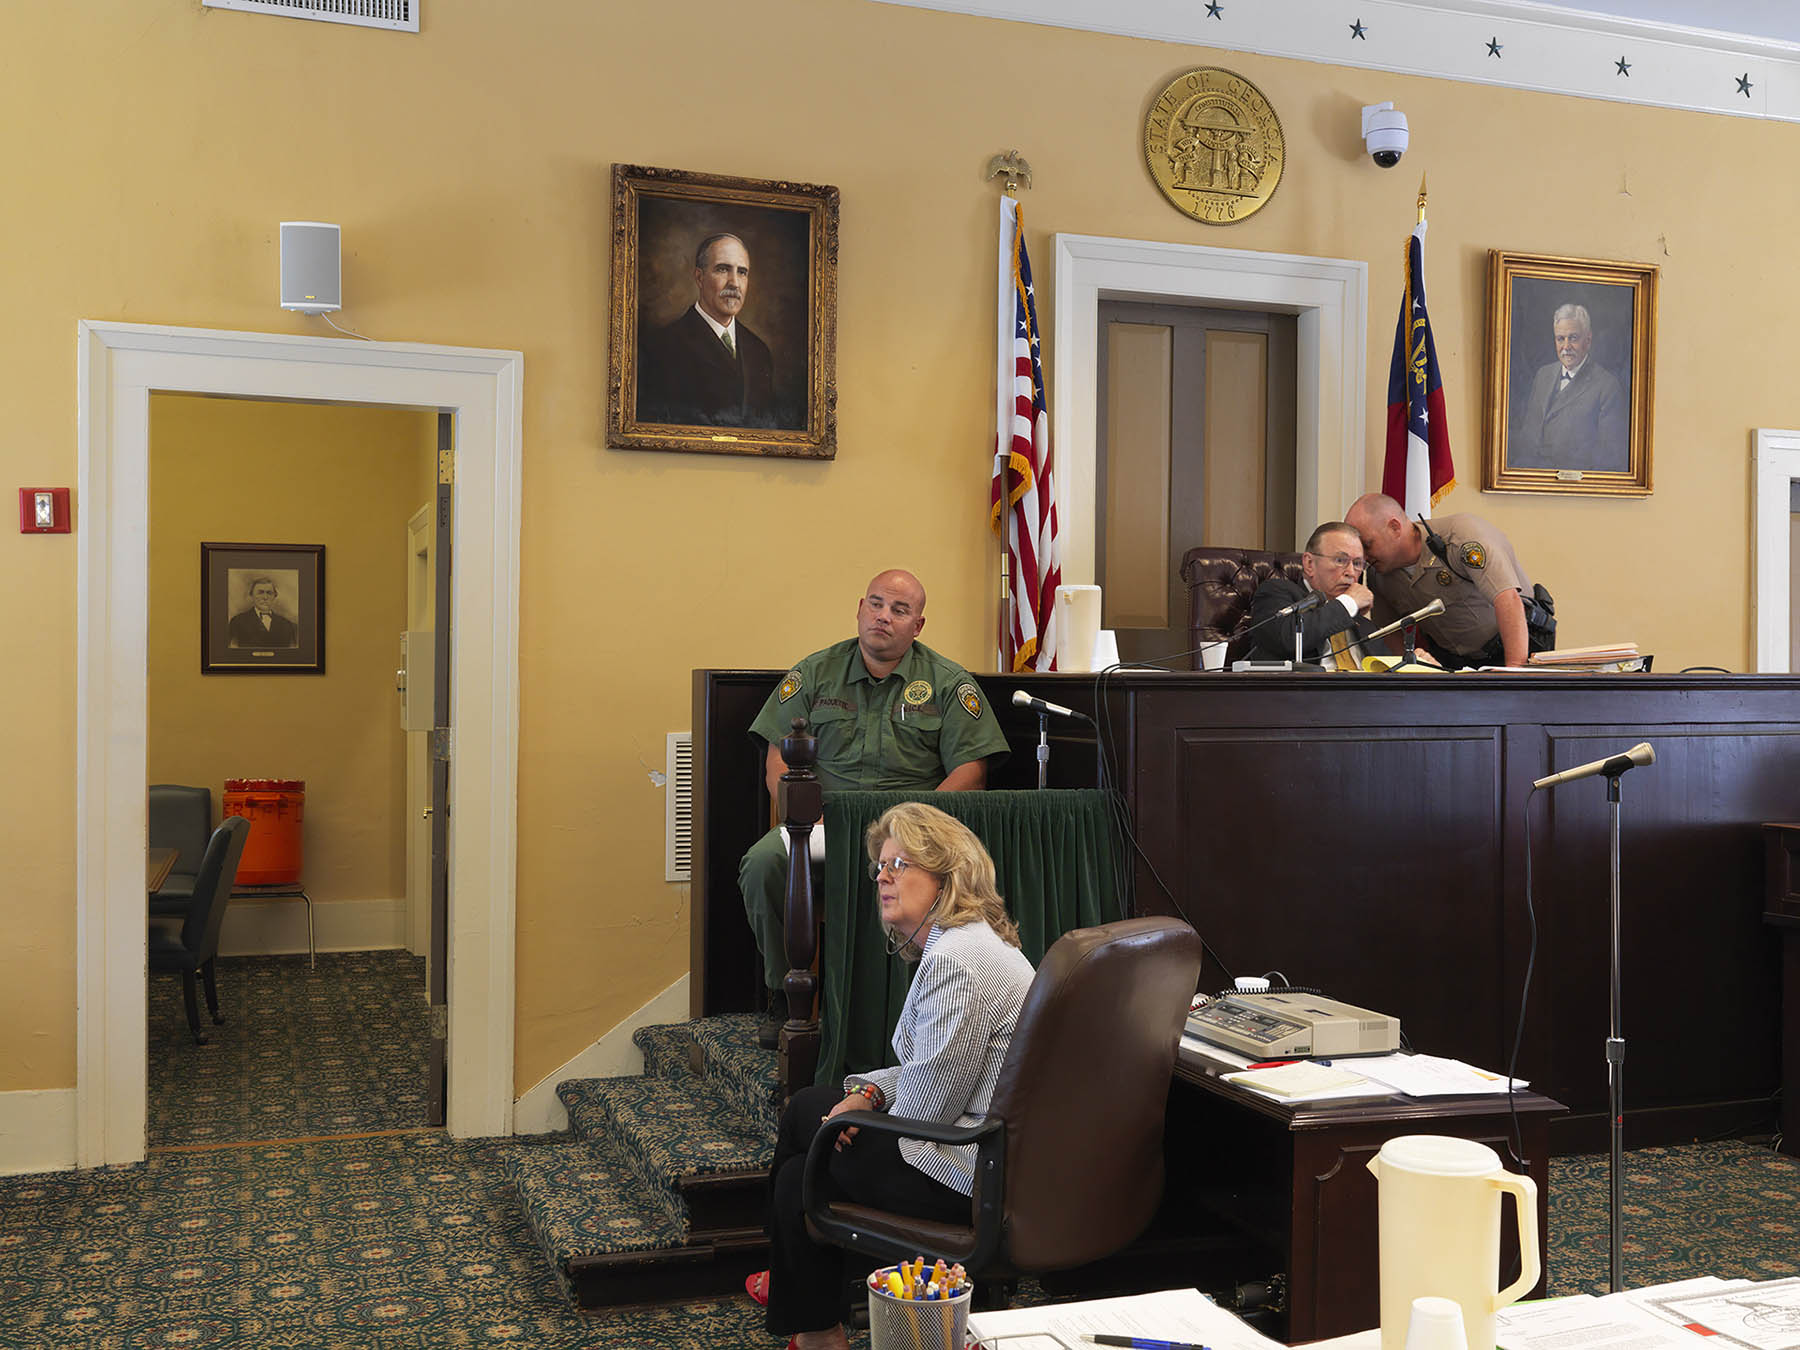 USA, GA, June 2013. Greene County Courthouse in Greensboro, Judge Prior, presiding. The courthouse was built in 1849 and later extended.USA, Georgia, Juni 2013. Rechtbank in het Greene County Courthouse in Greensboro. Rechter Prior. Het gebouw stamt uit 1849.